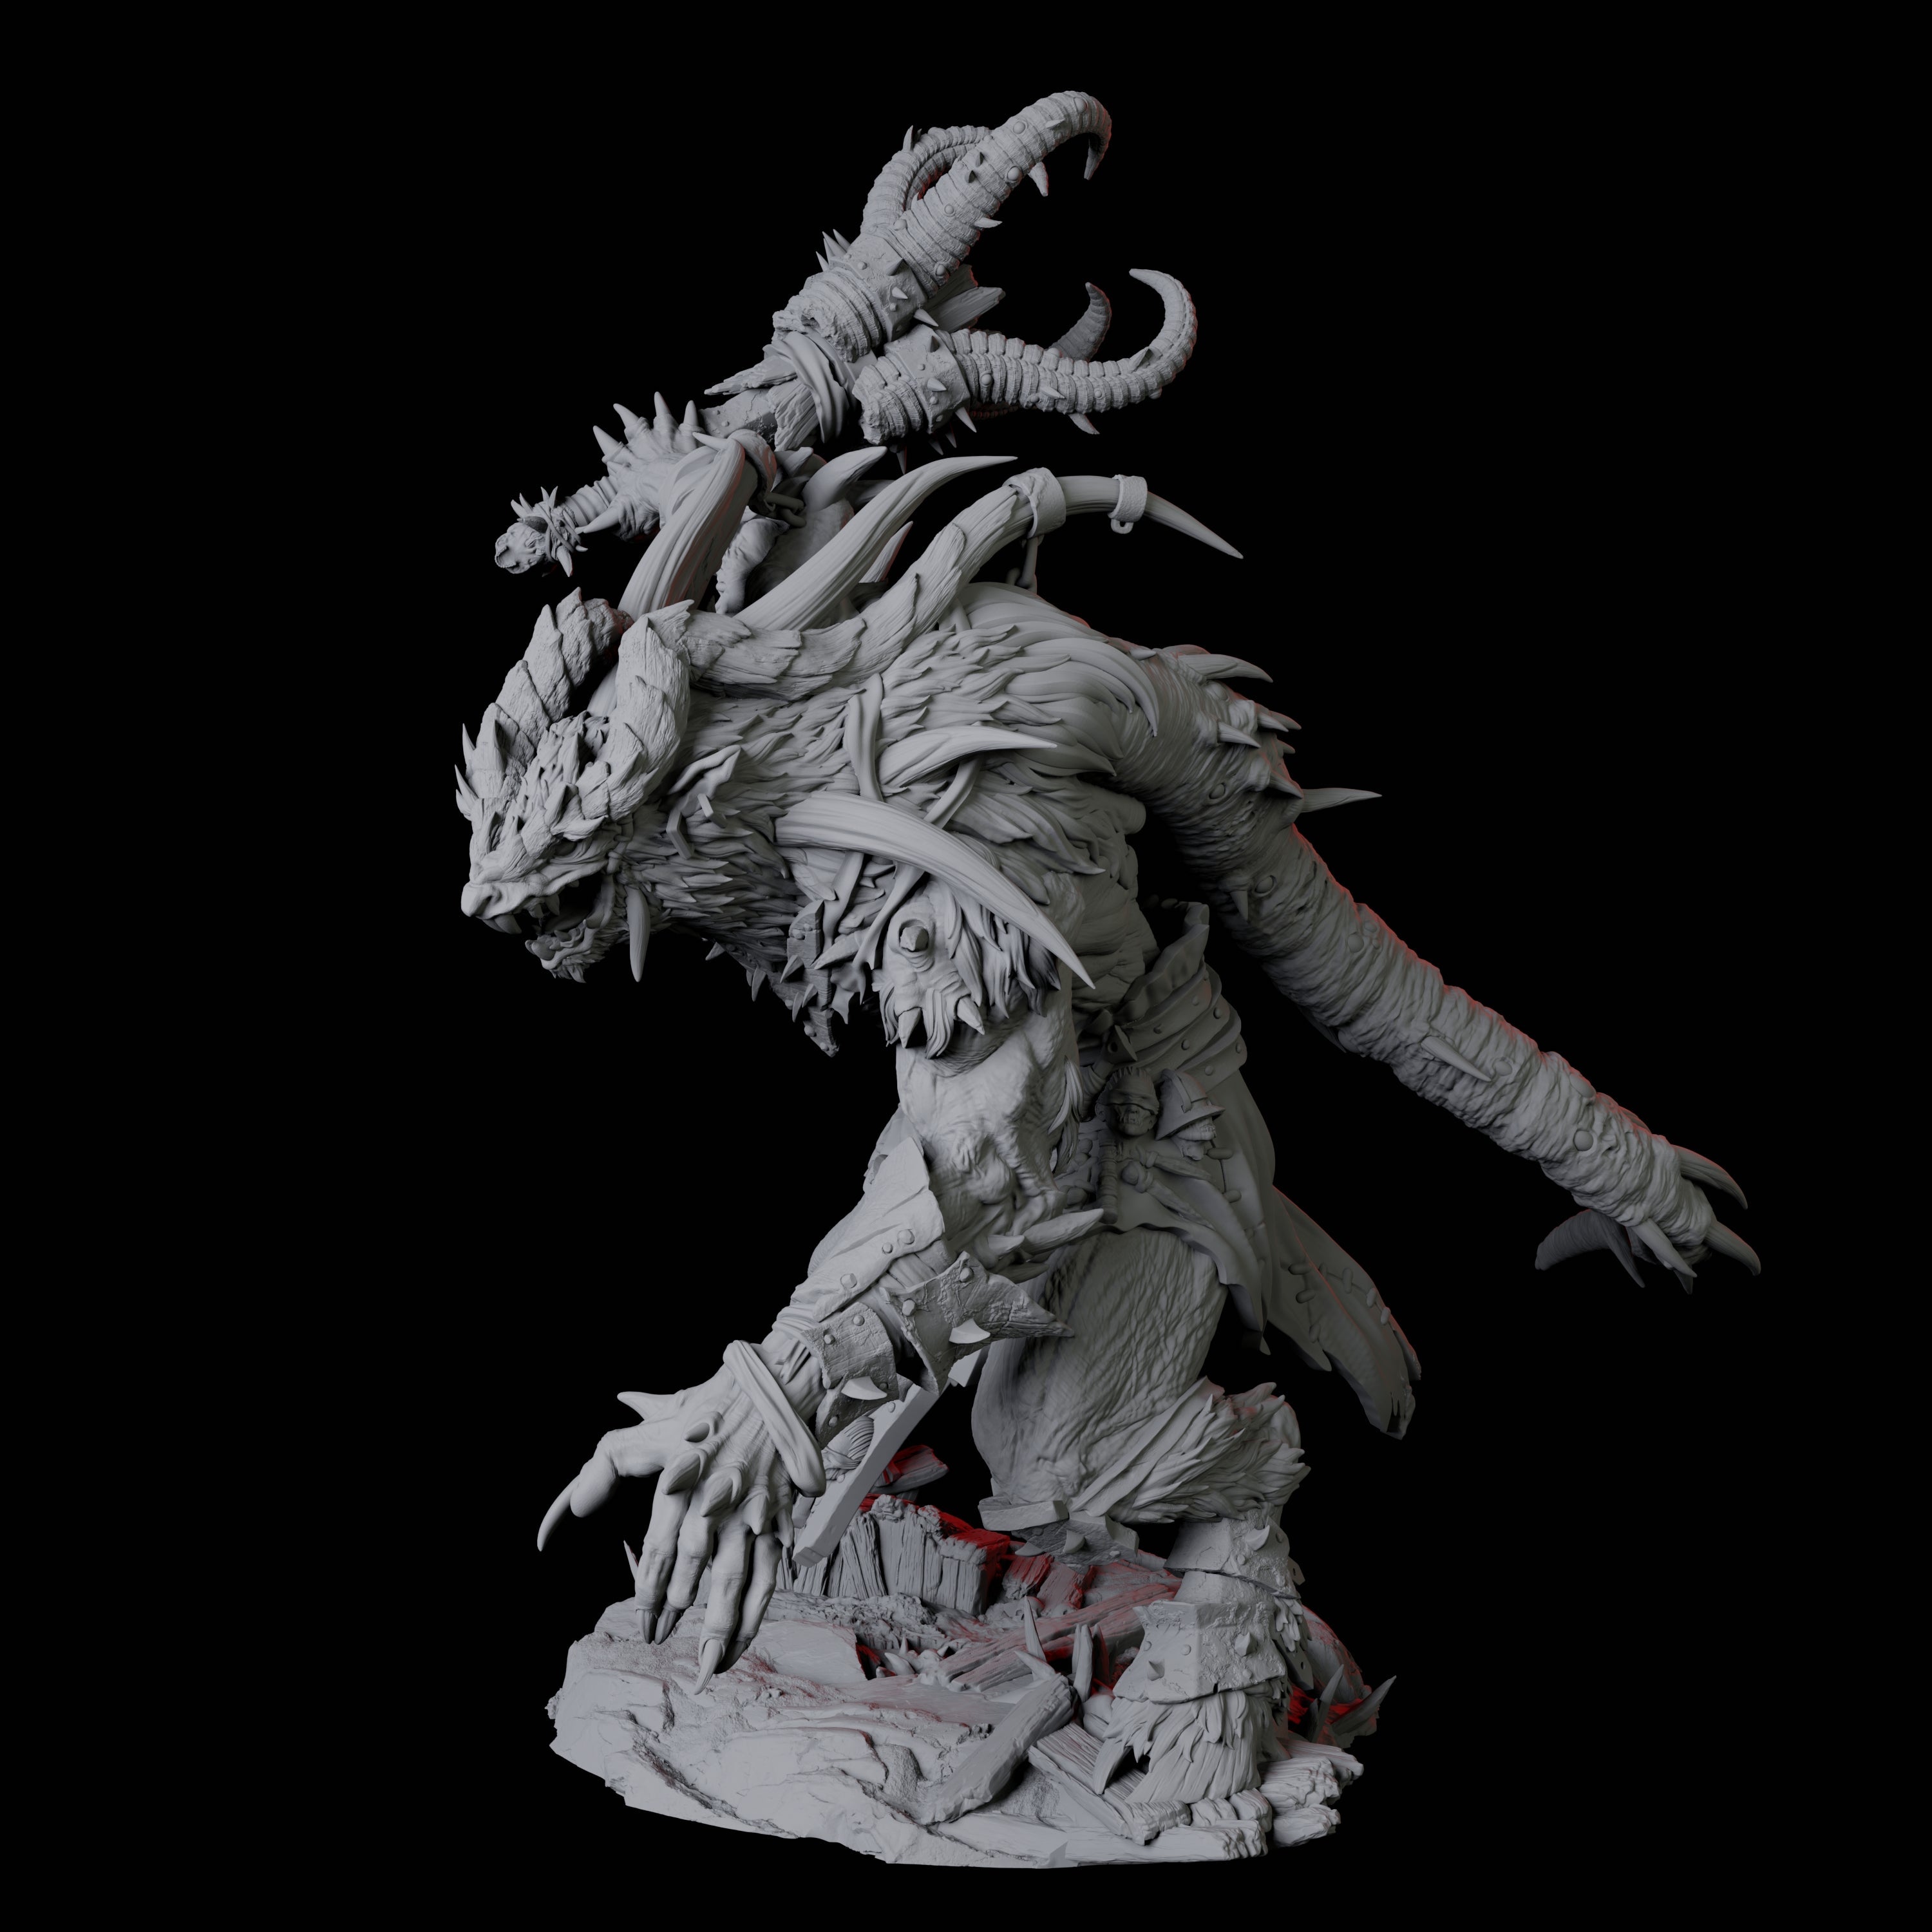 Giant Ratfolk Barbarian C Miniature for Dungeons and Dragons, Pathfinder or other TTRPGs